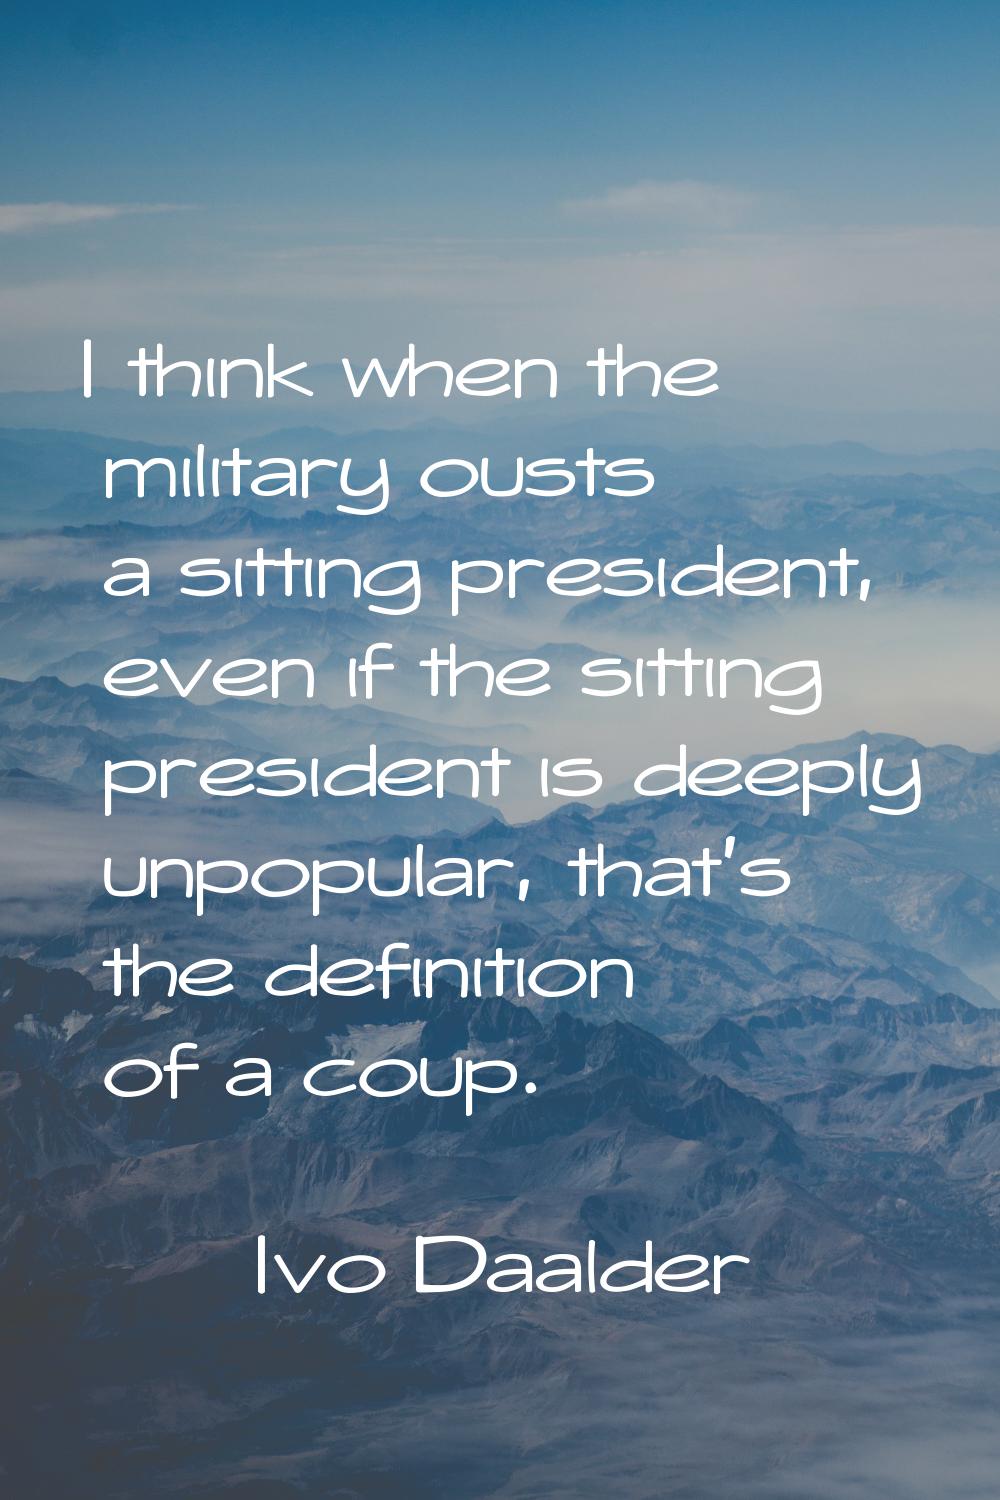 I think when the military ousts a sitting president, even if the sitting president is deeply unpopu